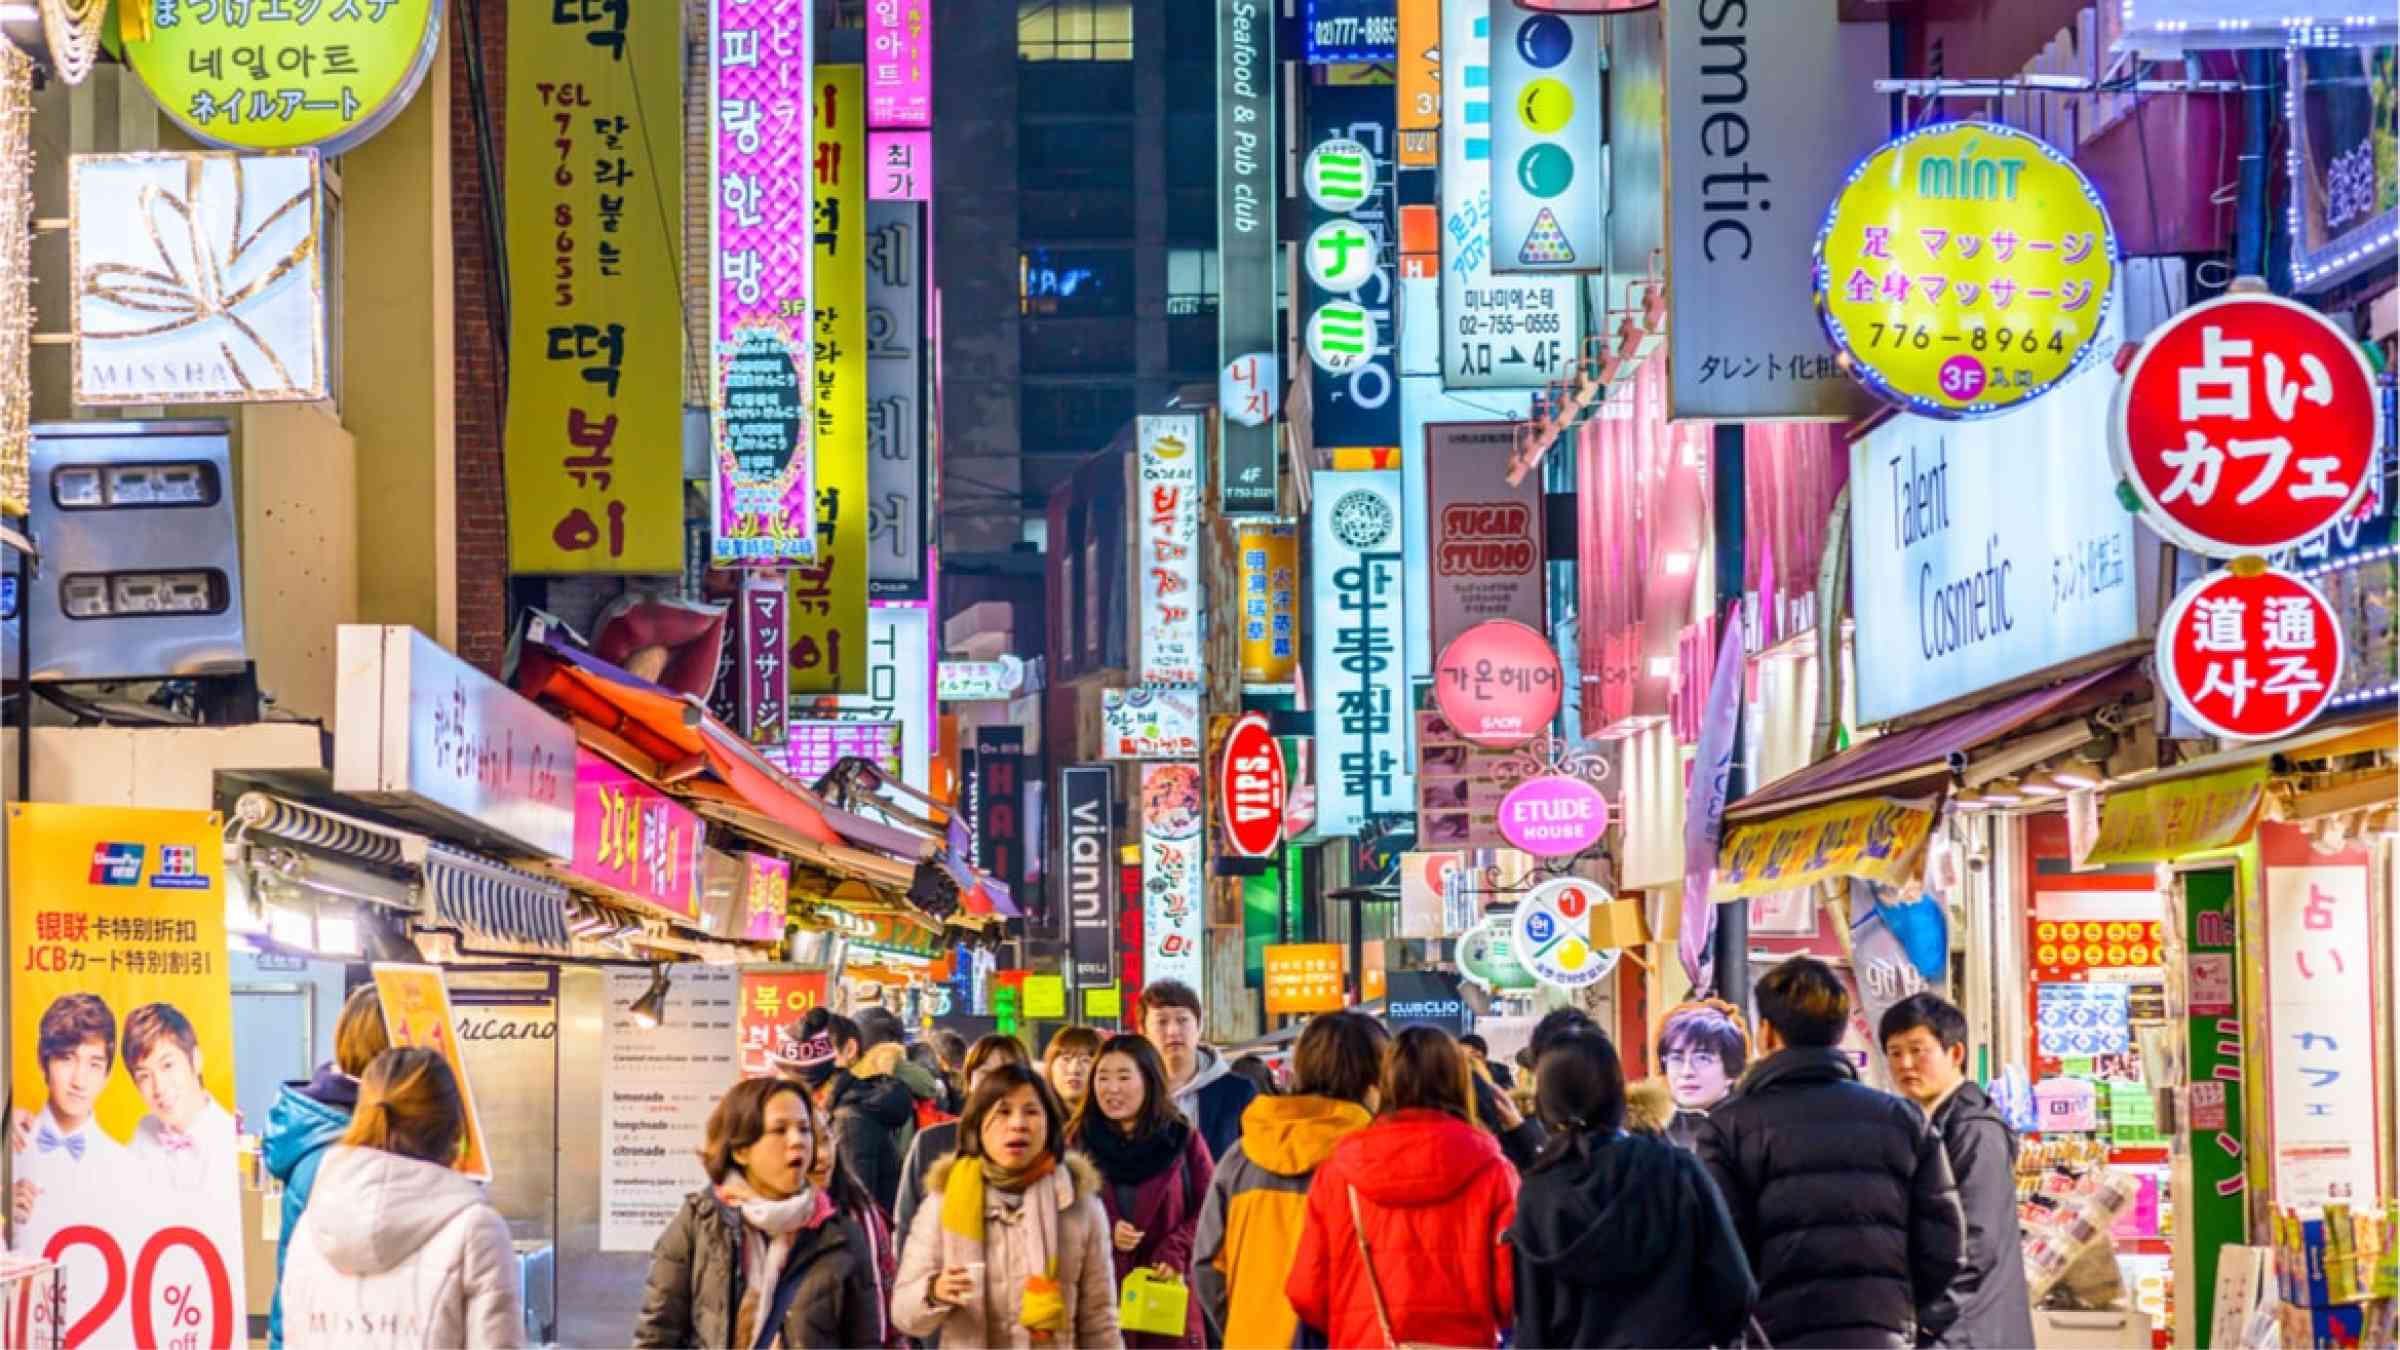 A busy street in the heart of Seoul in South Korea.